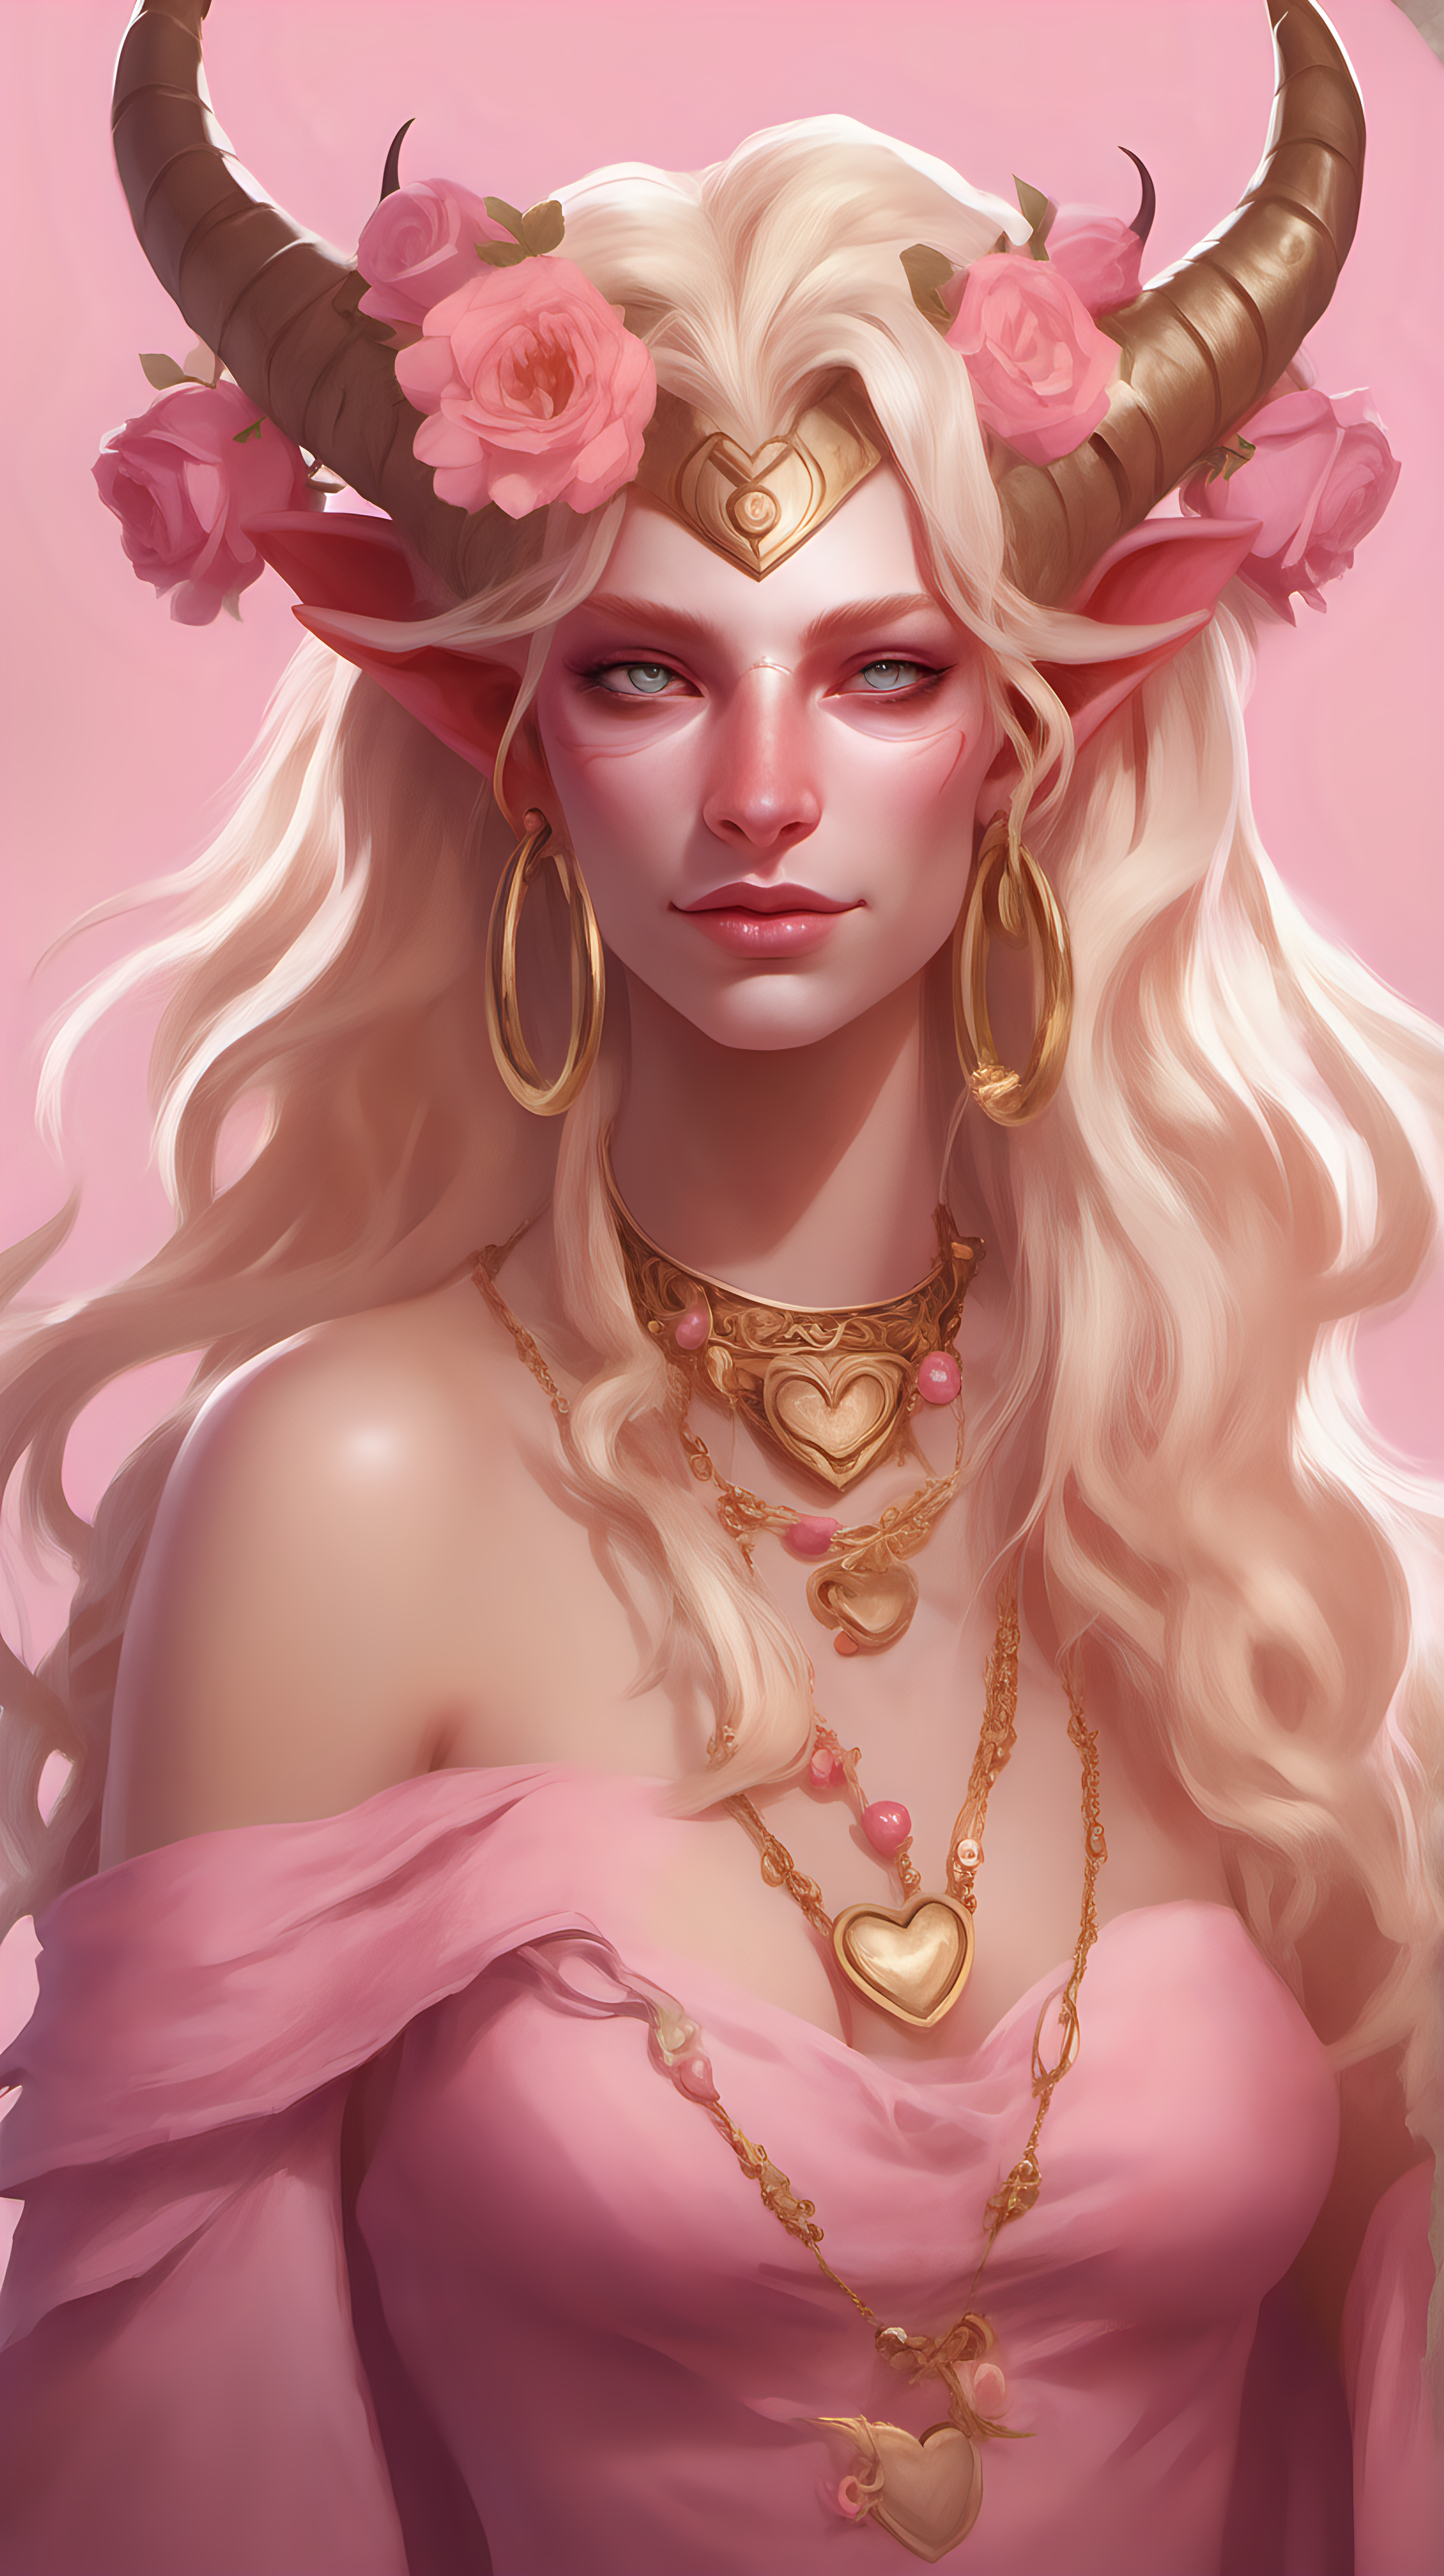 Pink skinned tiefling woman. She has white horns that meet at the top of her head to form a heart. She has light pink eyes. She has light blonde eyelashes. She has blonde long hair. She is wearing a pink Greek-style dress with lots of flowers. She is wearing gold jewelry